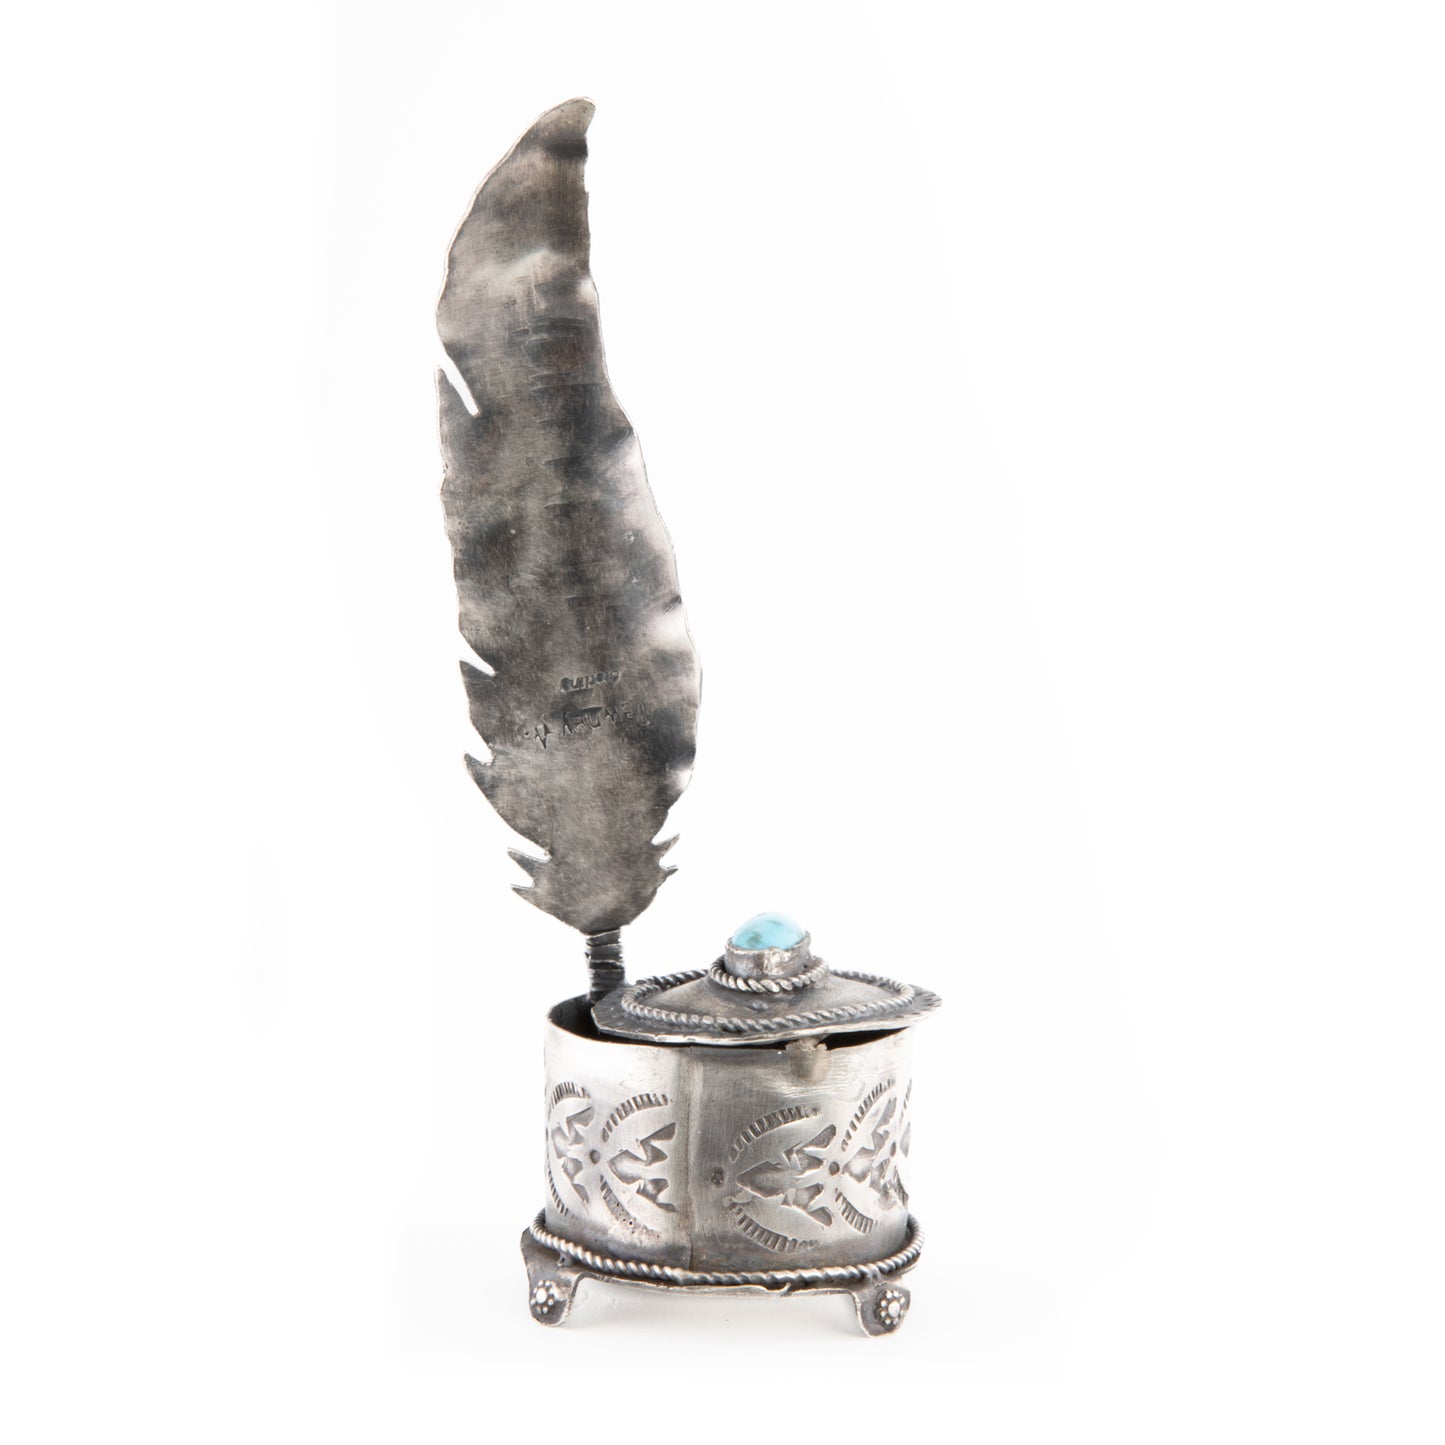 Replica Silver Inkwell and Quill Pen by Tawney Willie